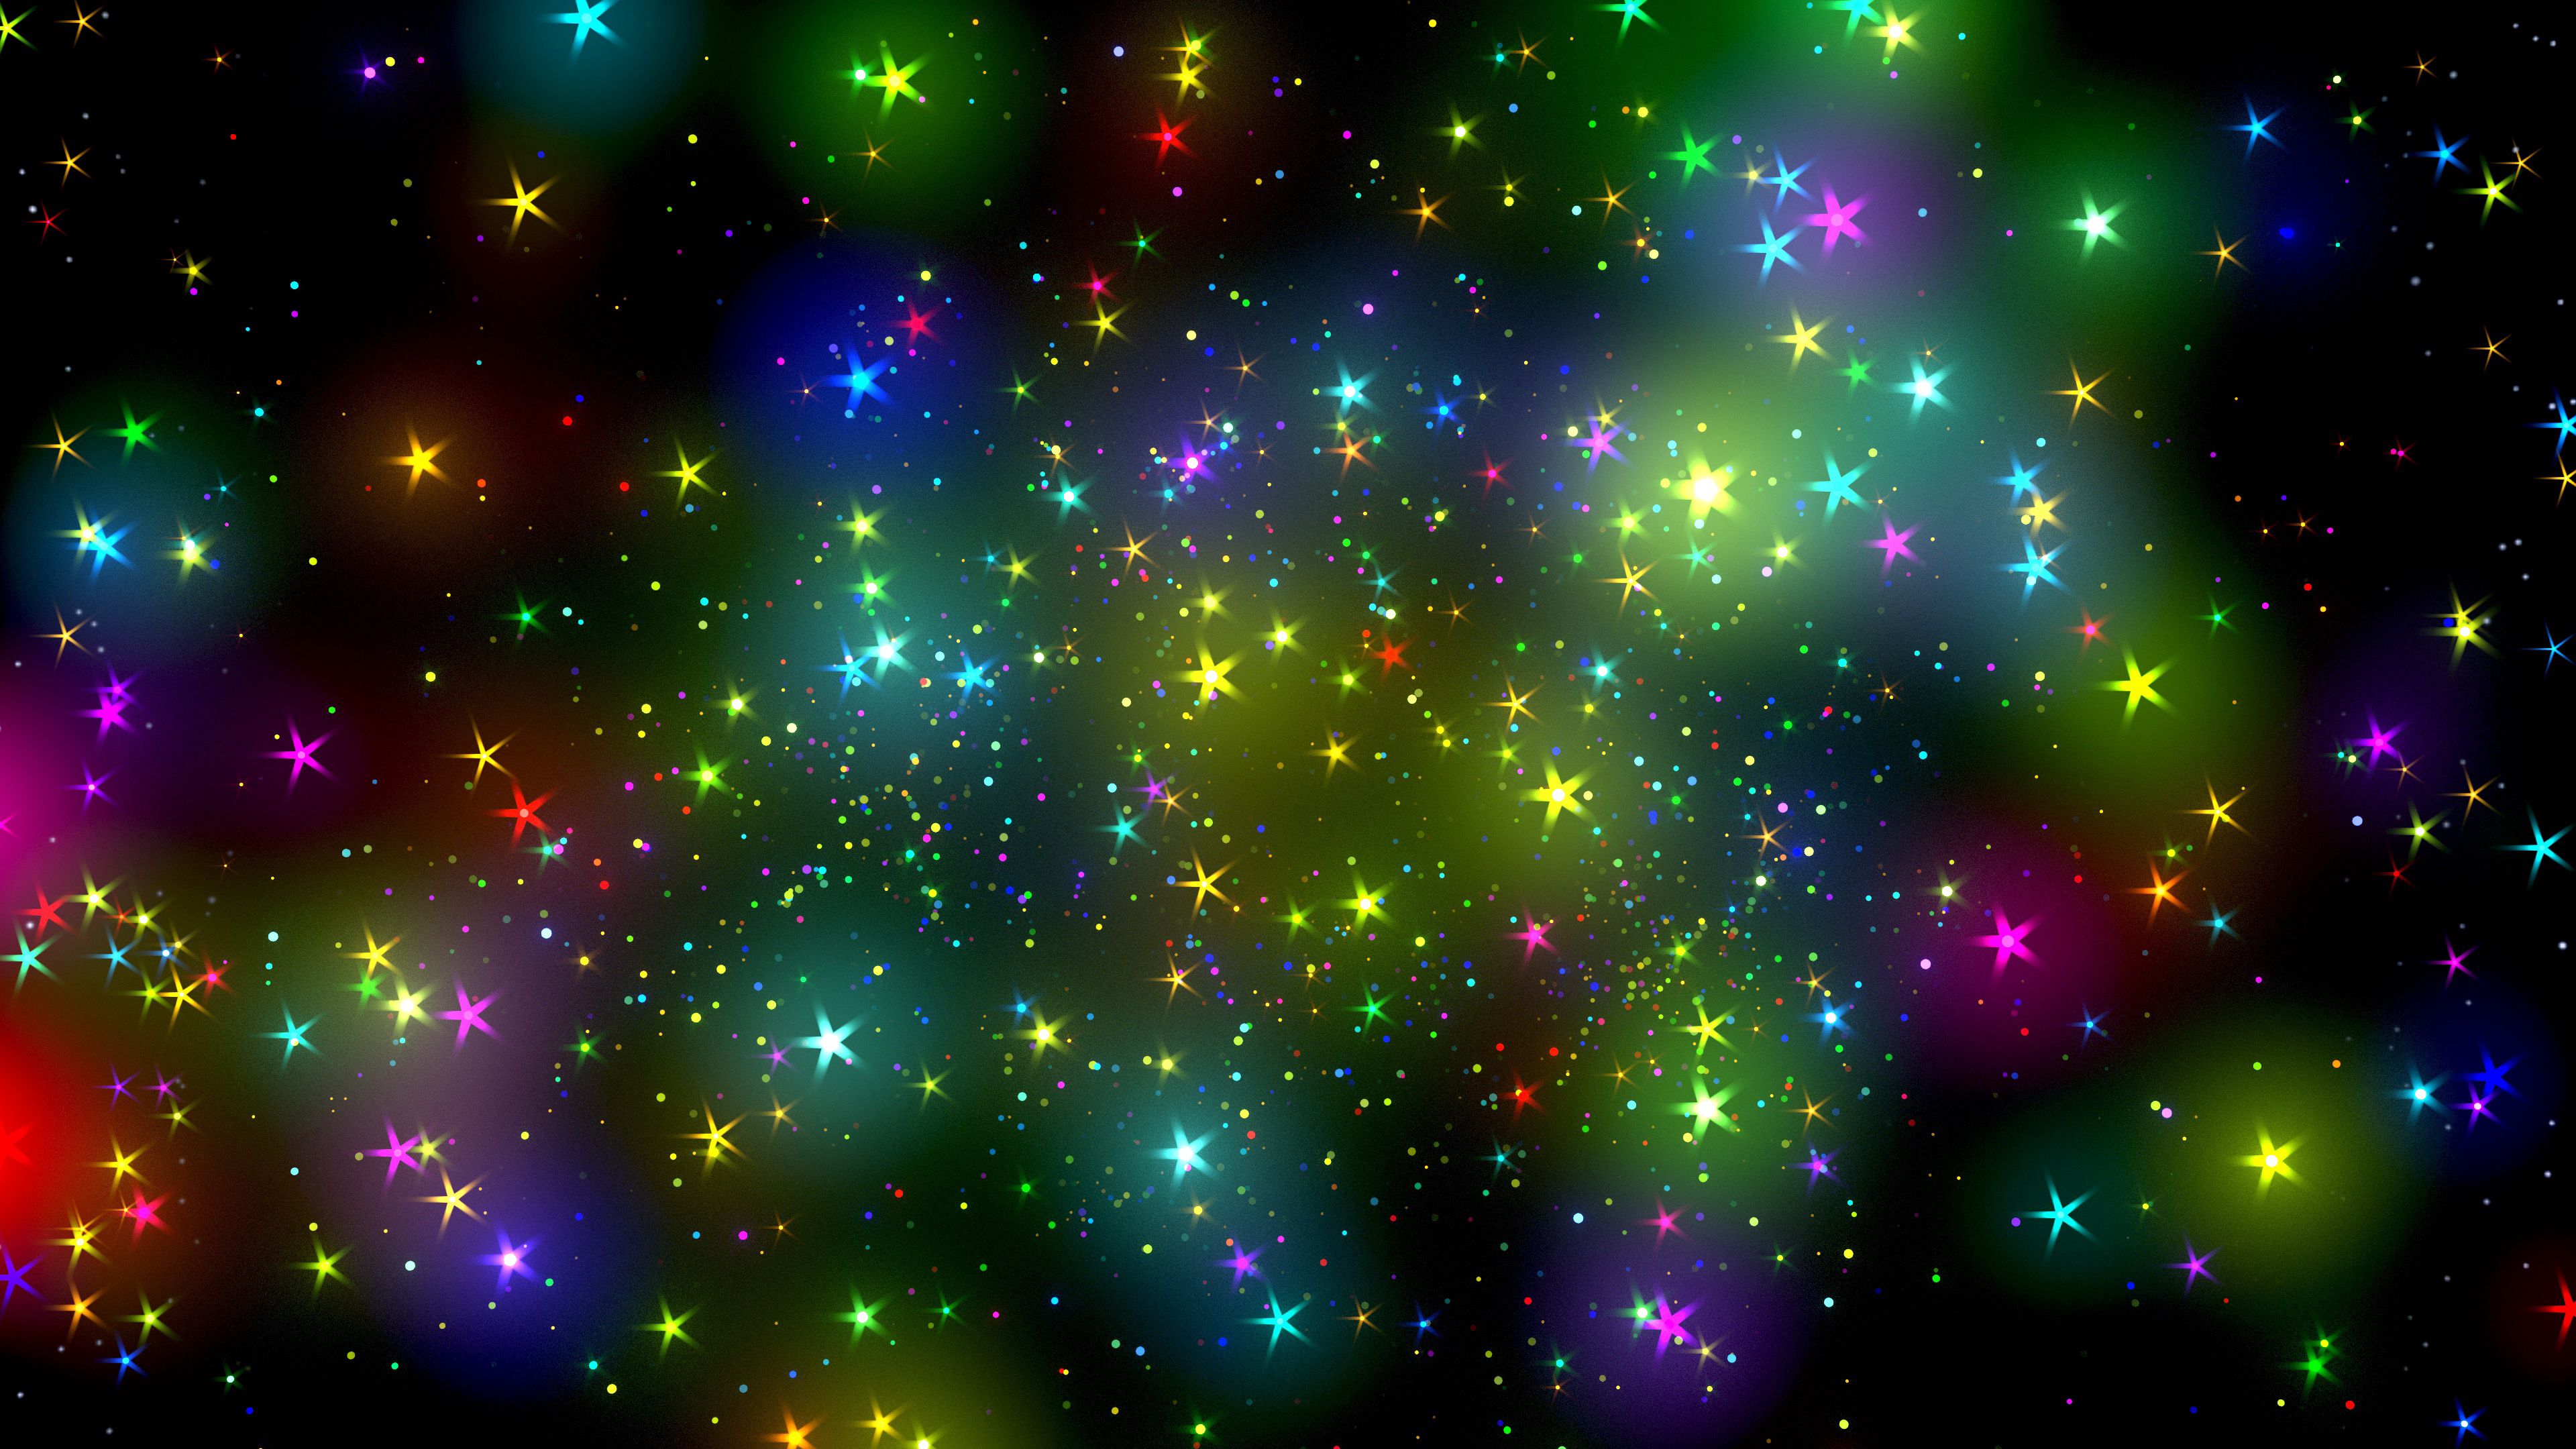 brilliance, multicolored, motley, shine, abstract, stars, shining High Definition image